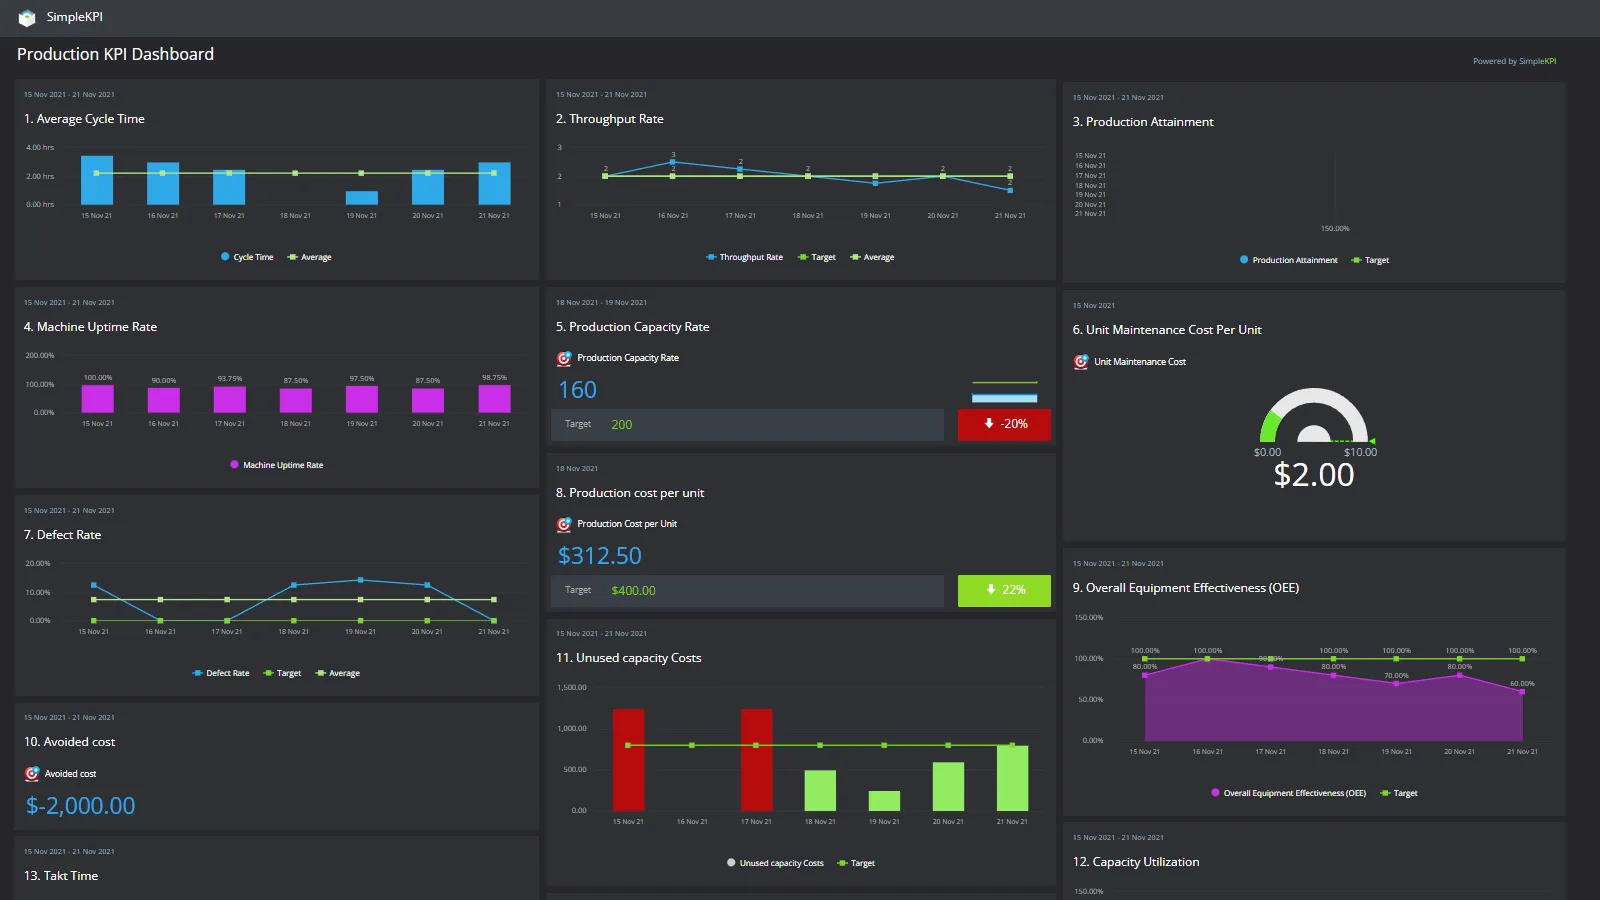 A production KPI Dashboard in dark mode showing different charts and graphs